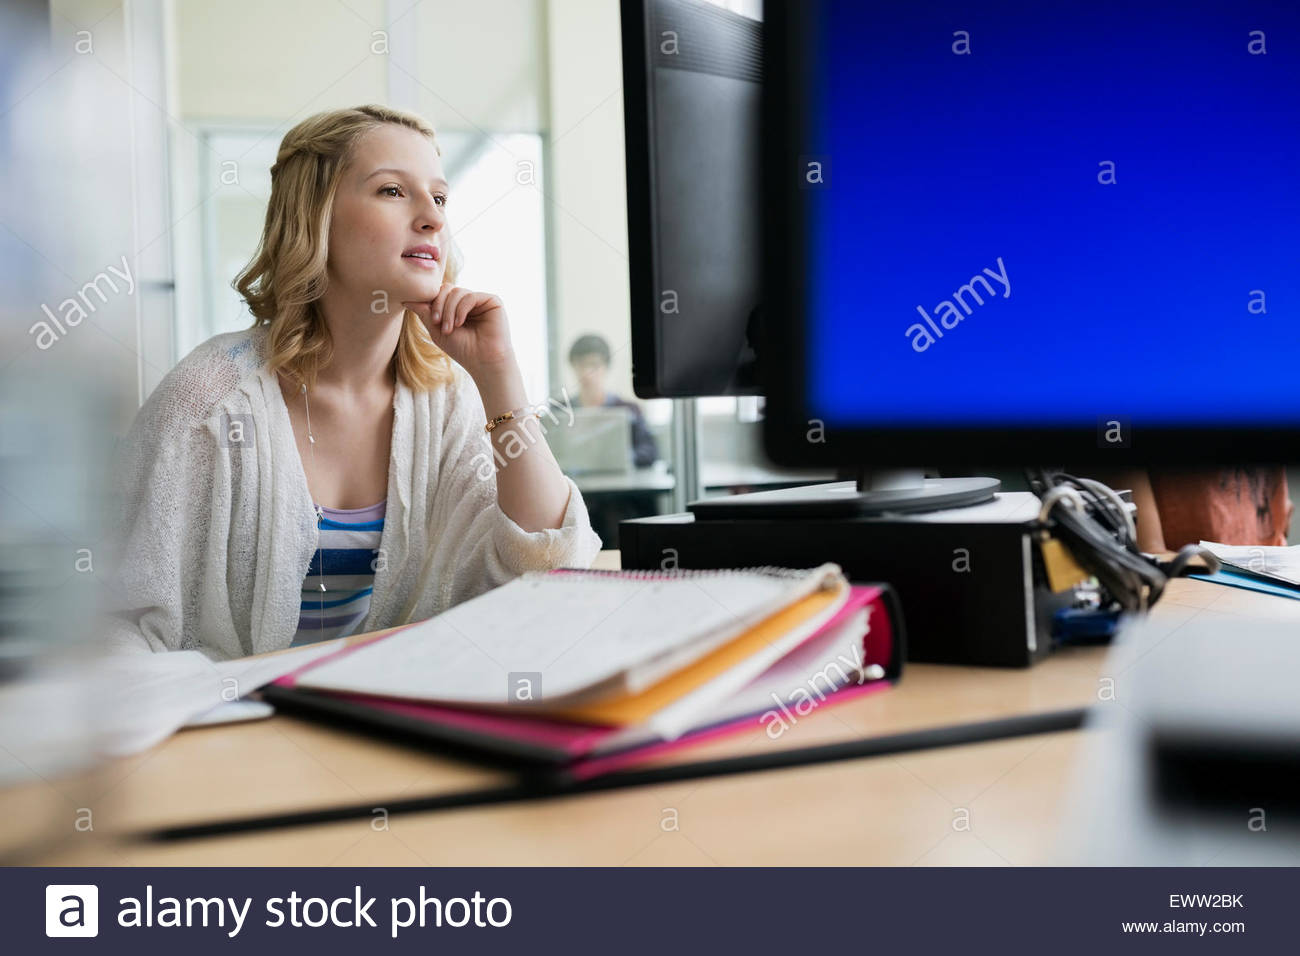 College student studying at computer in classroom Banque D'Images